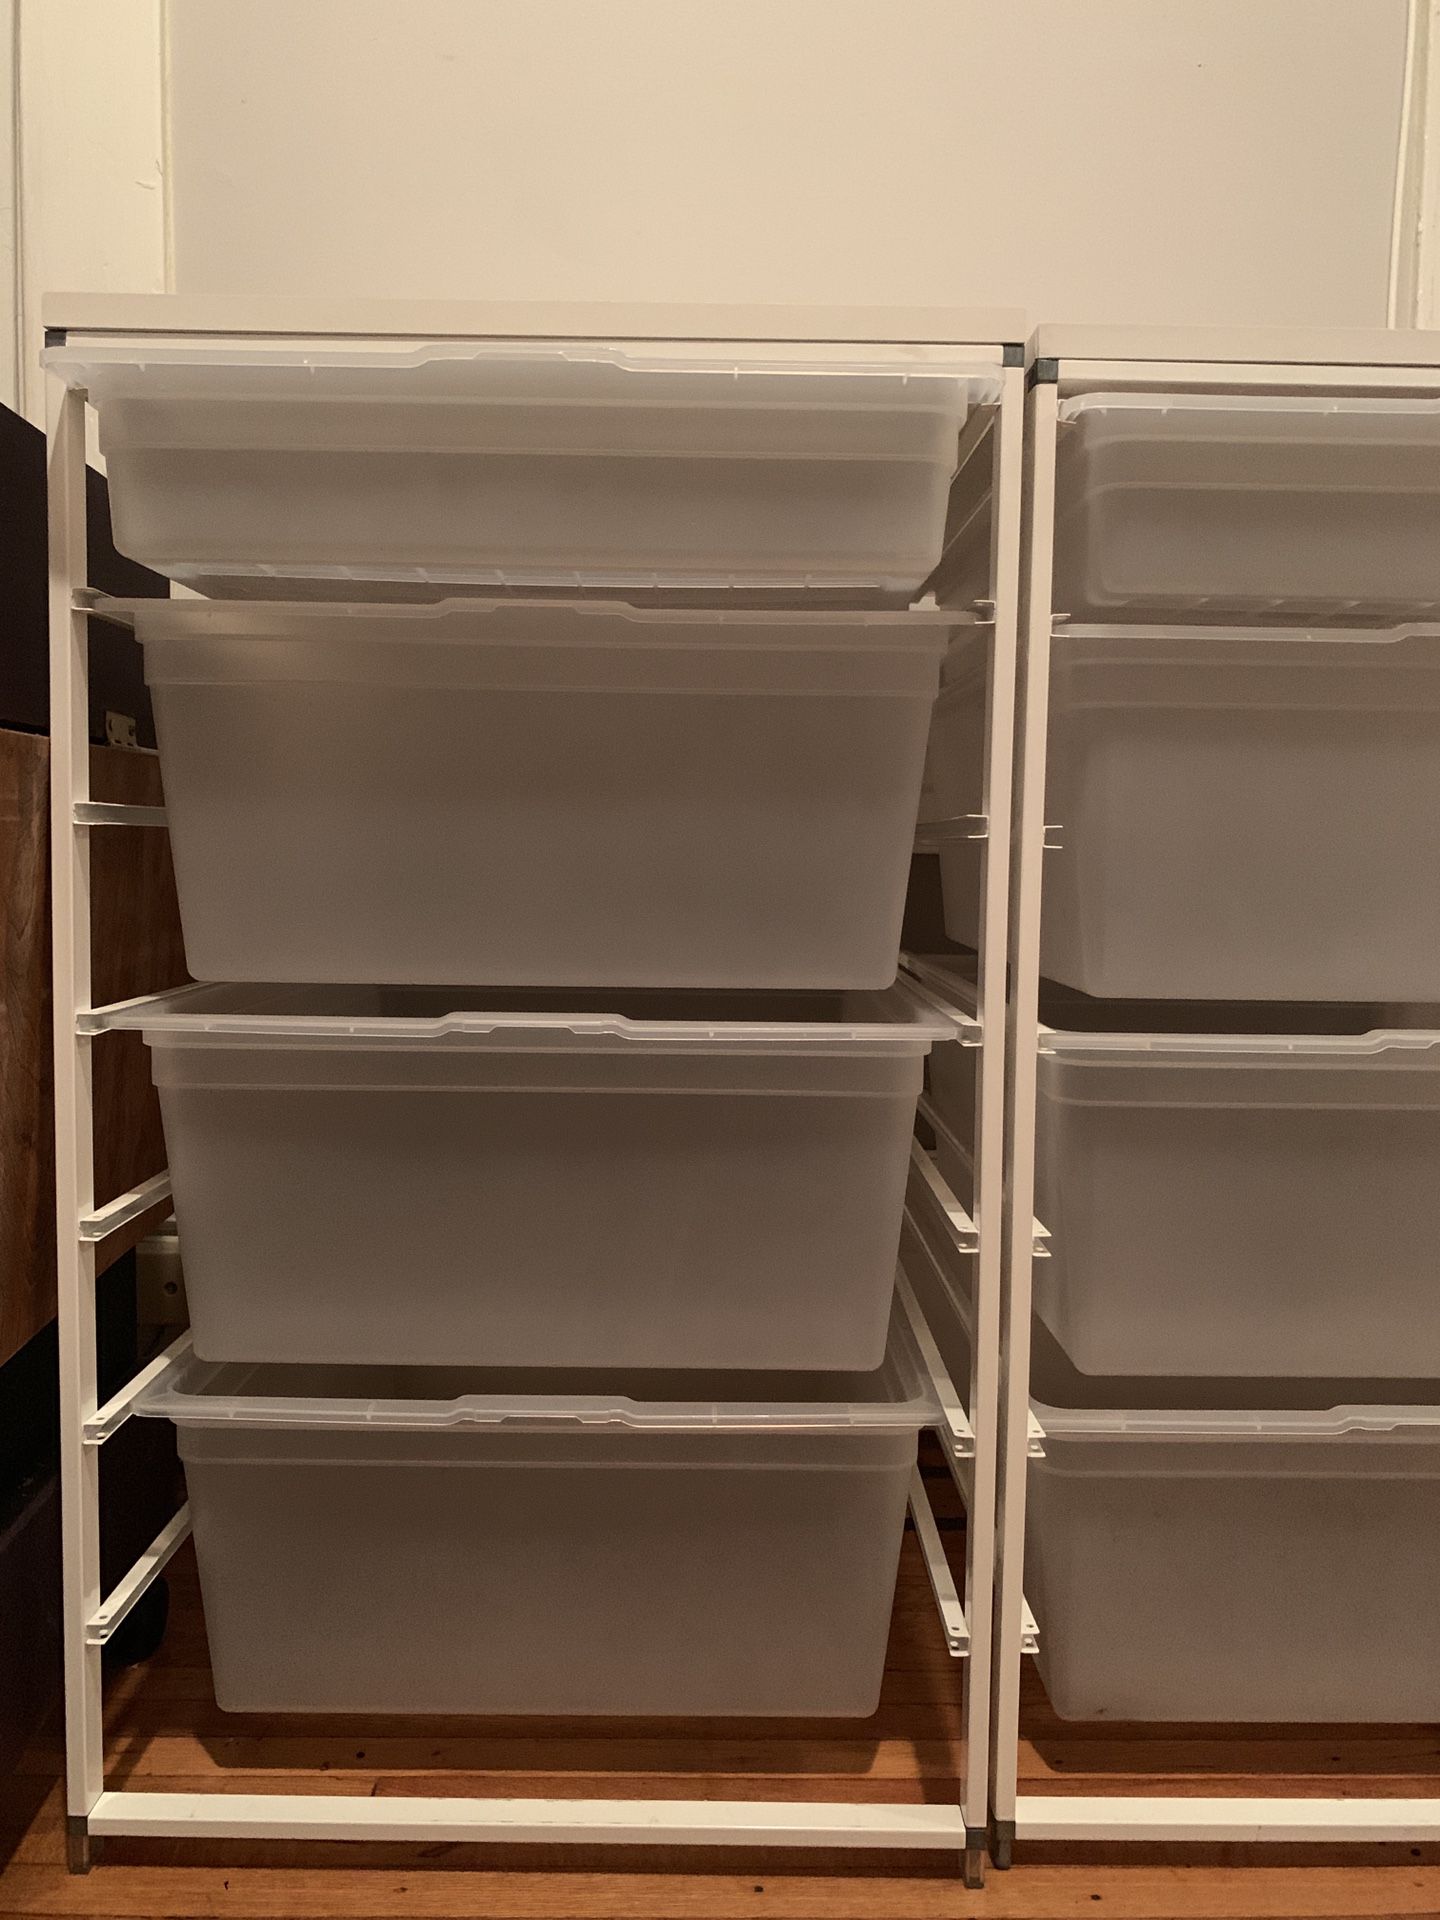 Elfa Storage System 5 Drawers for Sale in Fullerton, CA - OfferUp